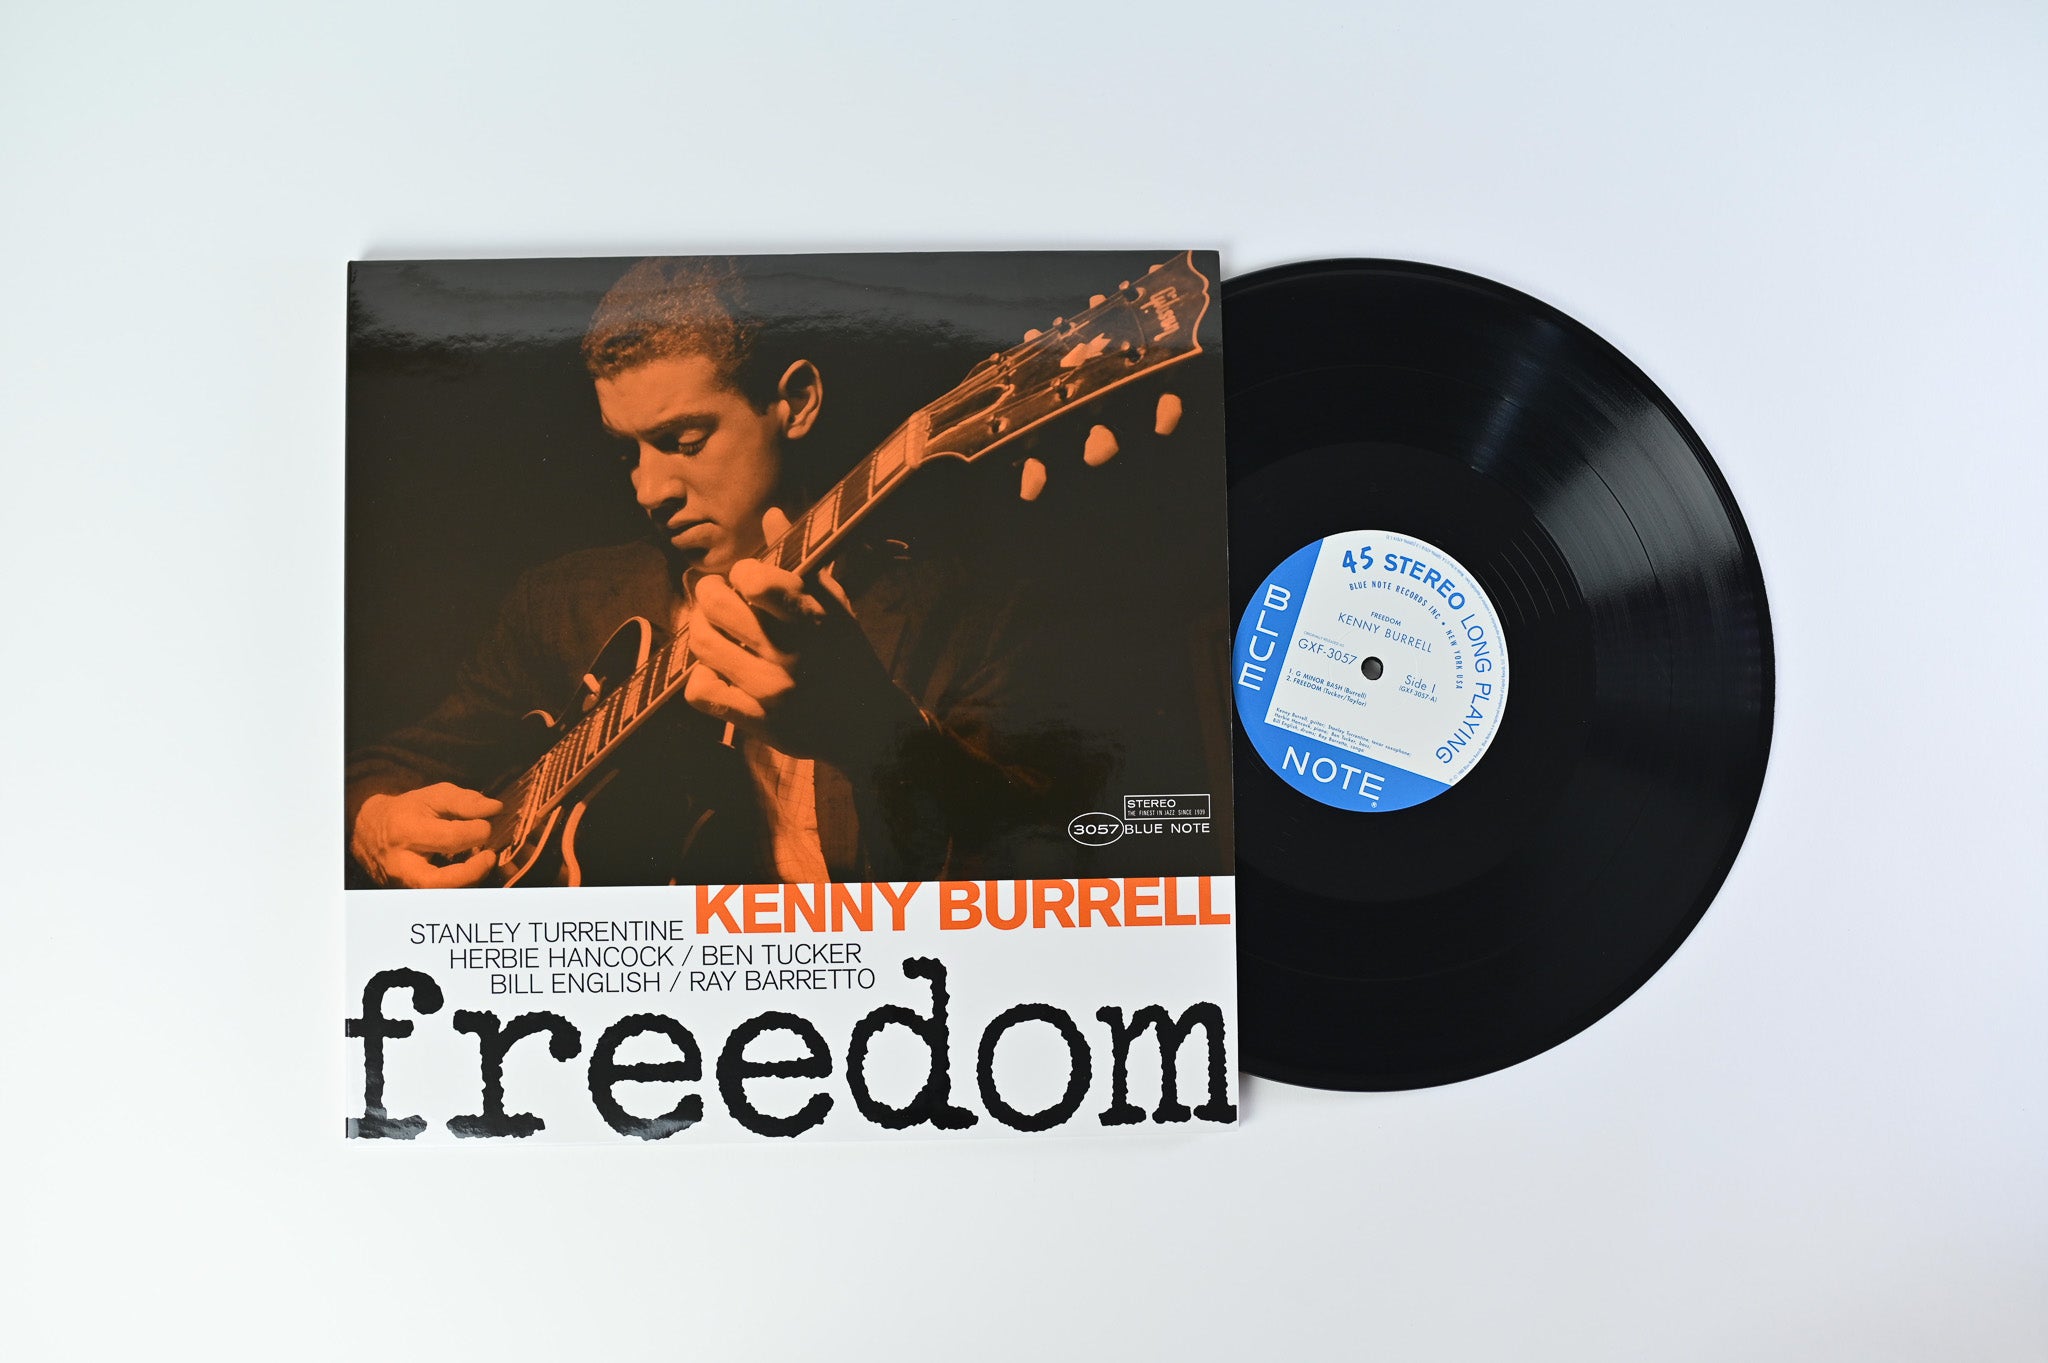 Kenny Burrell - Freedom on Blue Note Music Matters Ltd Numbered Reissue 45 RPM